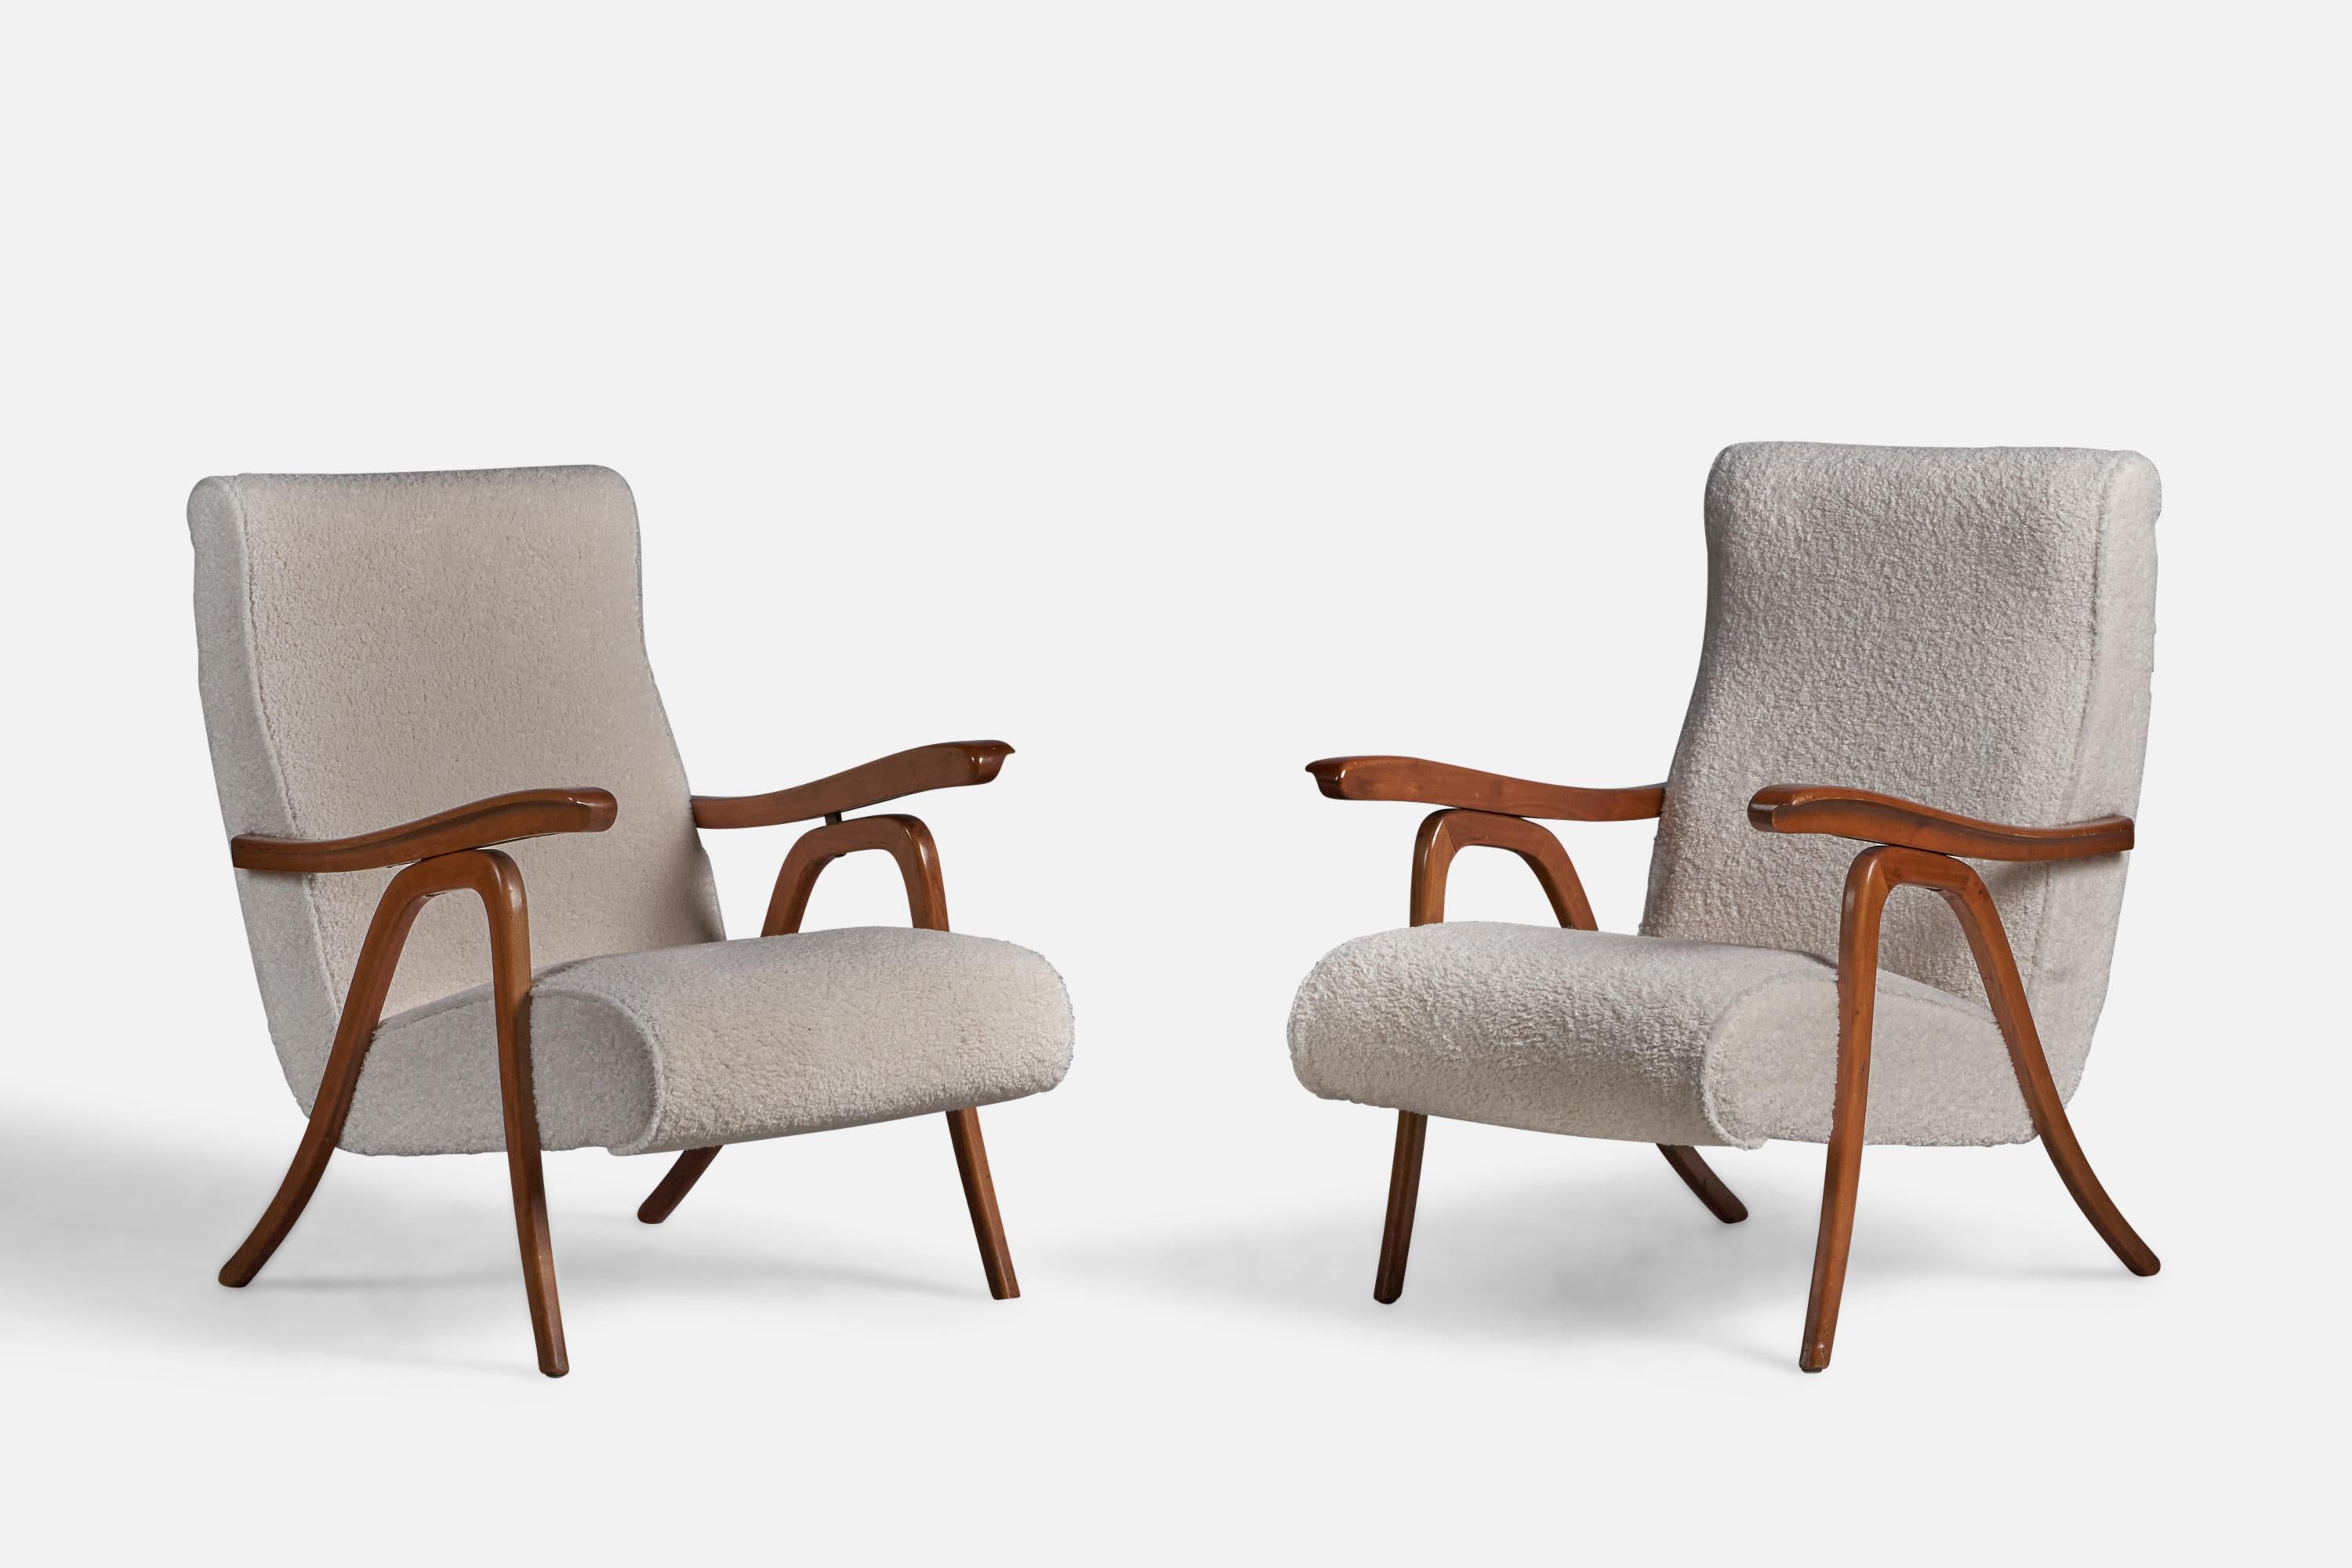 A pair of adjustable walnut and white bouclé fabric lounge chairs designed and produced in Italy, 1950s.

15.5” seat height